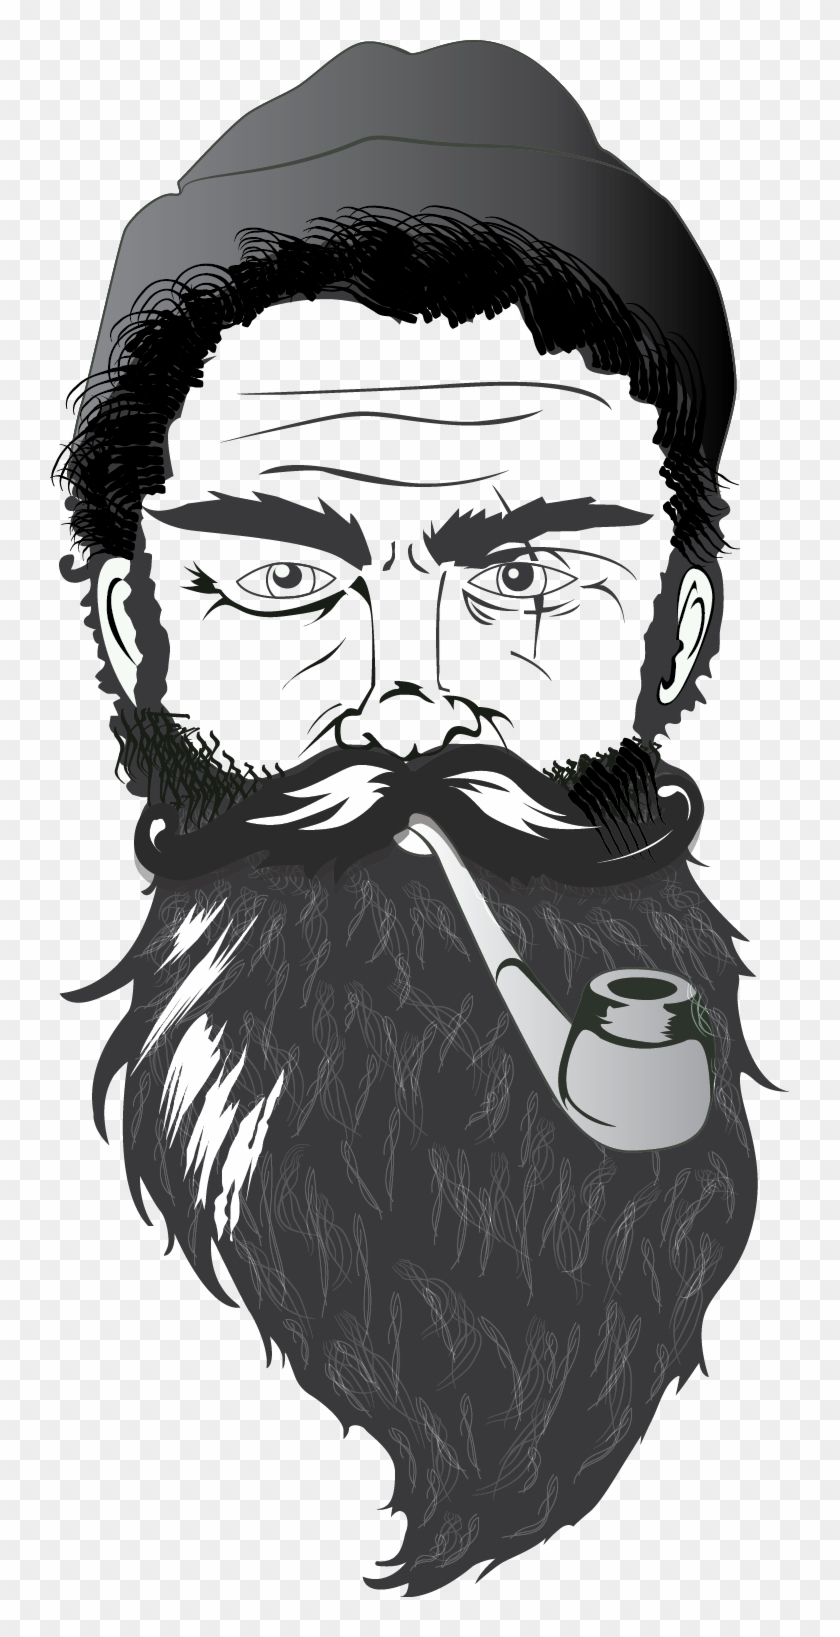 Beard PNG Transparent Hand Drawn Black And White Line Drawing Beard And  Beard Hand Painted Moustache Beard PNG Image For Free Download  Beard  drawing Beard clipart Line drawing